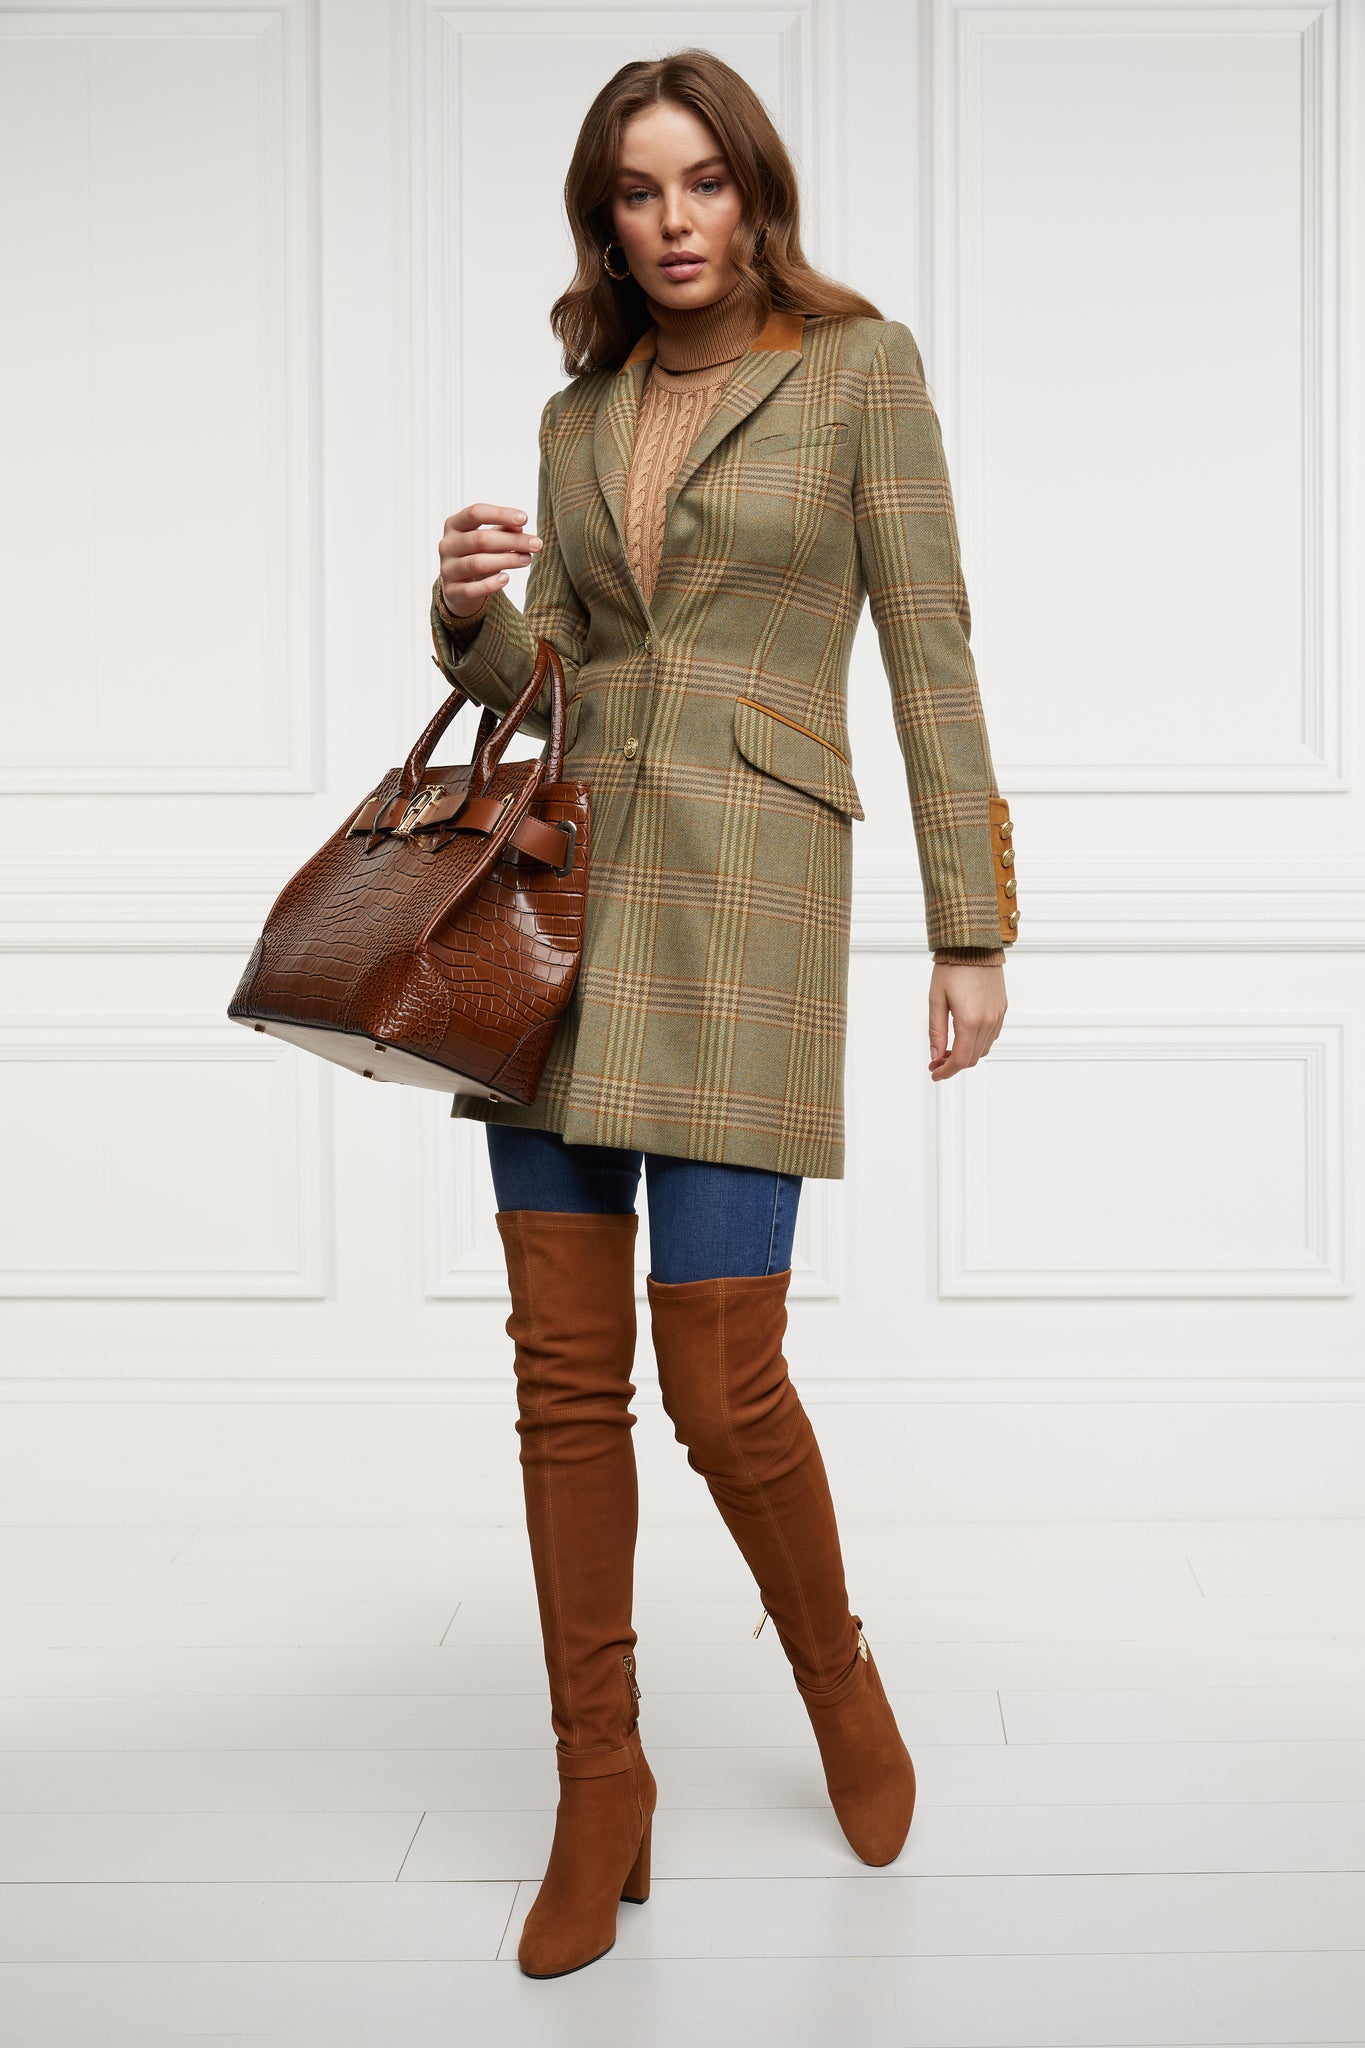 green tweed womens coat with gold hardware and tan suede detailing with tan croc tote bag